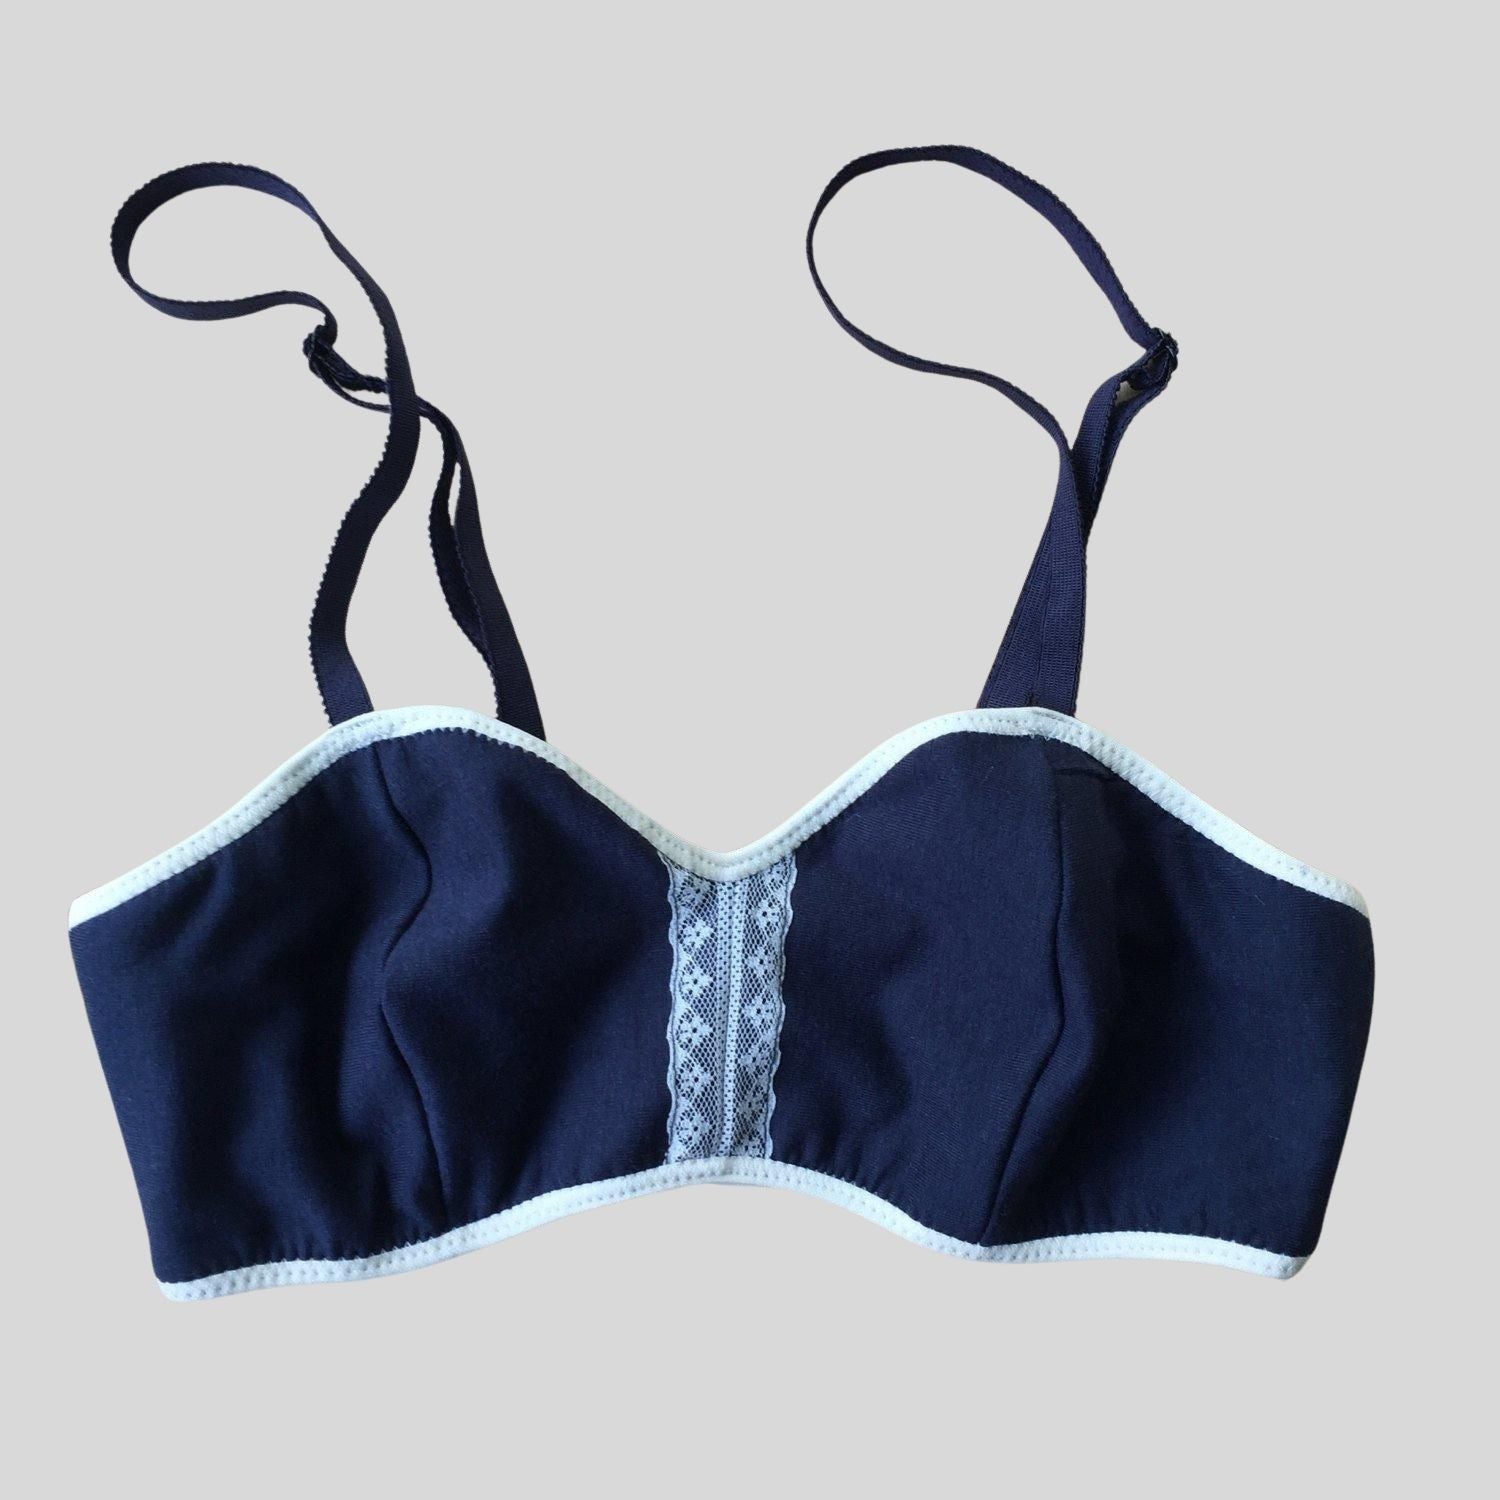 Organic cotton underwear  Shop women's bras and panty made in Canada –  econica